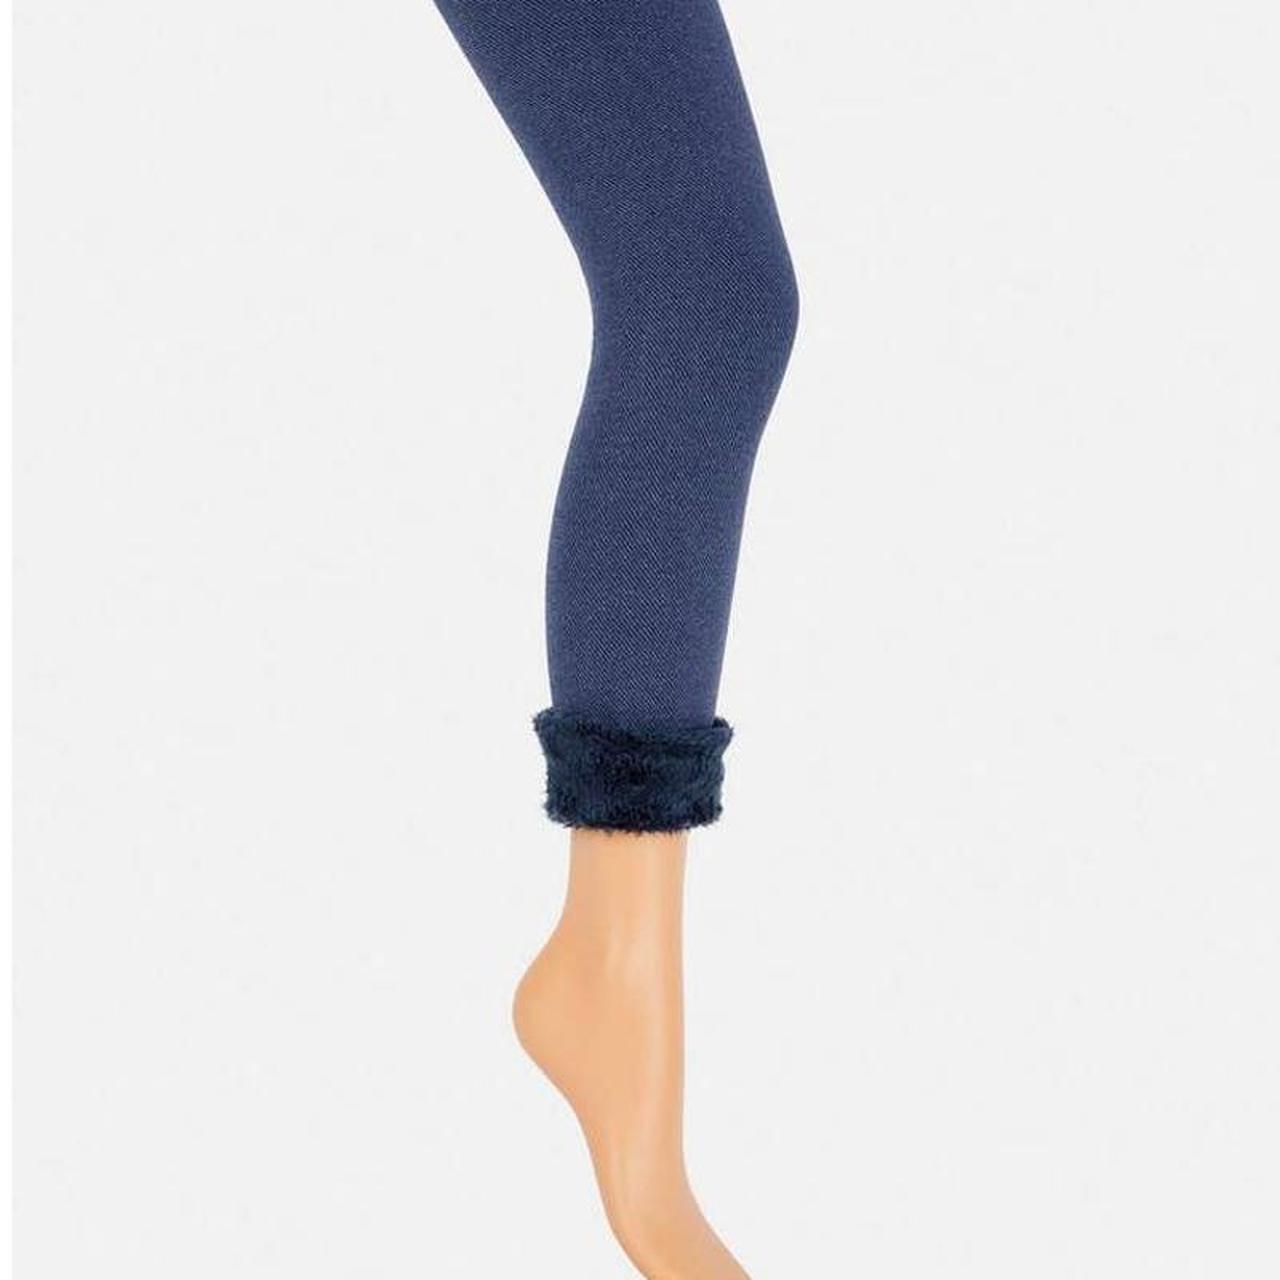 High Waisted Faux Velvet Velvet Plush Leggings Primark For Women And Girls  Thick, Warm, And Stretchy For Autumn And Winter From Wenjingcomeon, $5.43 |  DHgate.Com